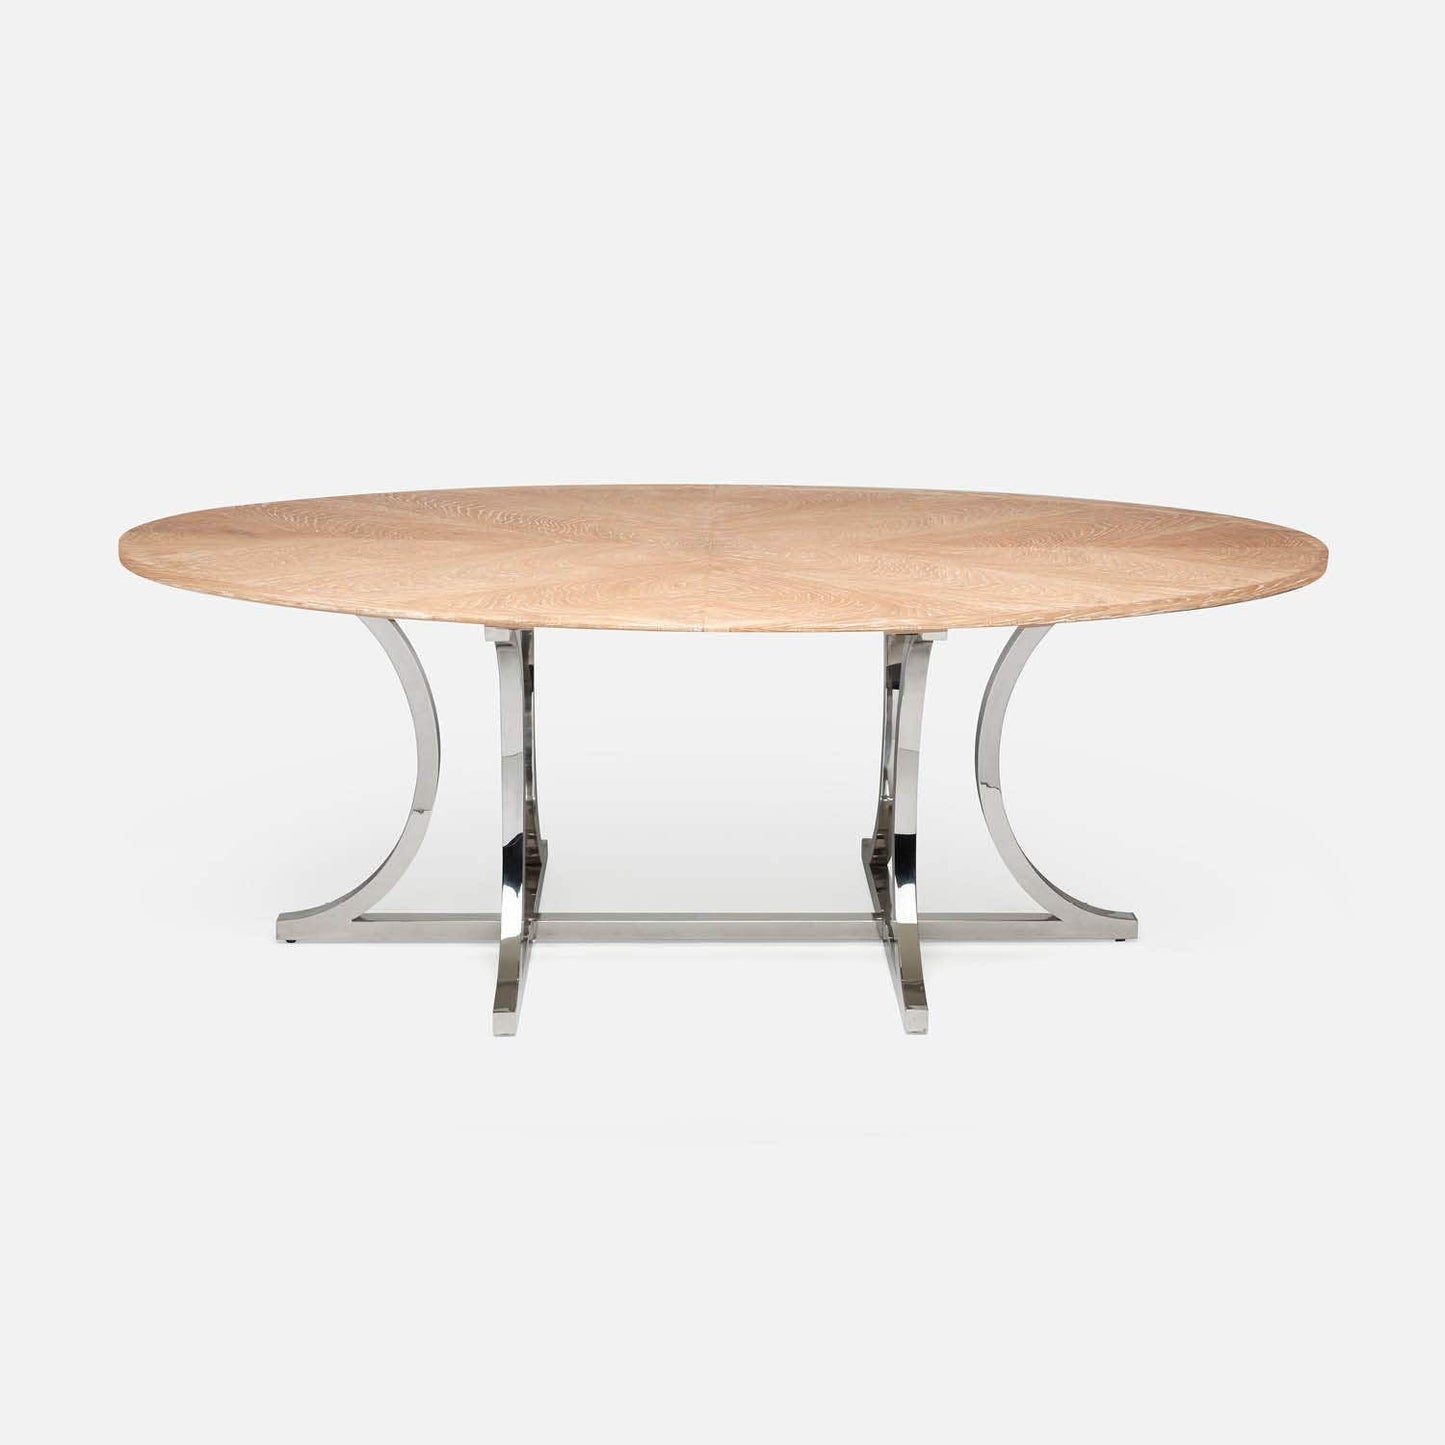 Made Goods Leighton 96" x 44" x 30" Polished Silver Steel Dinning Table With Oval White Cerused Oak Table Top